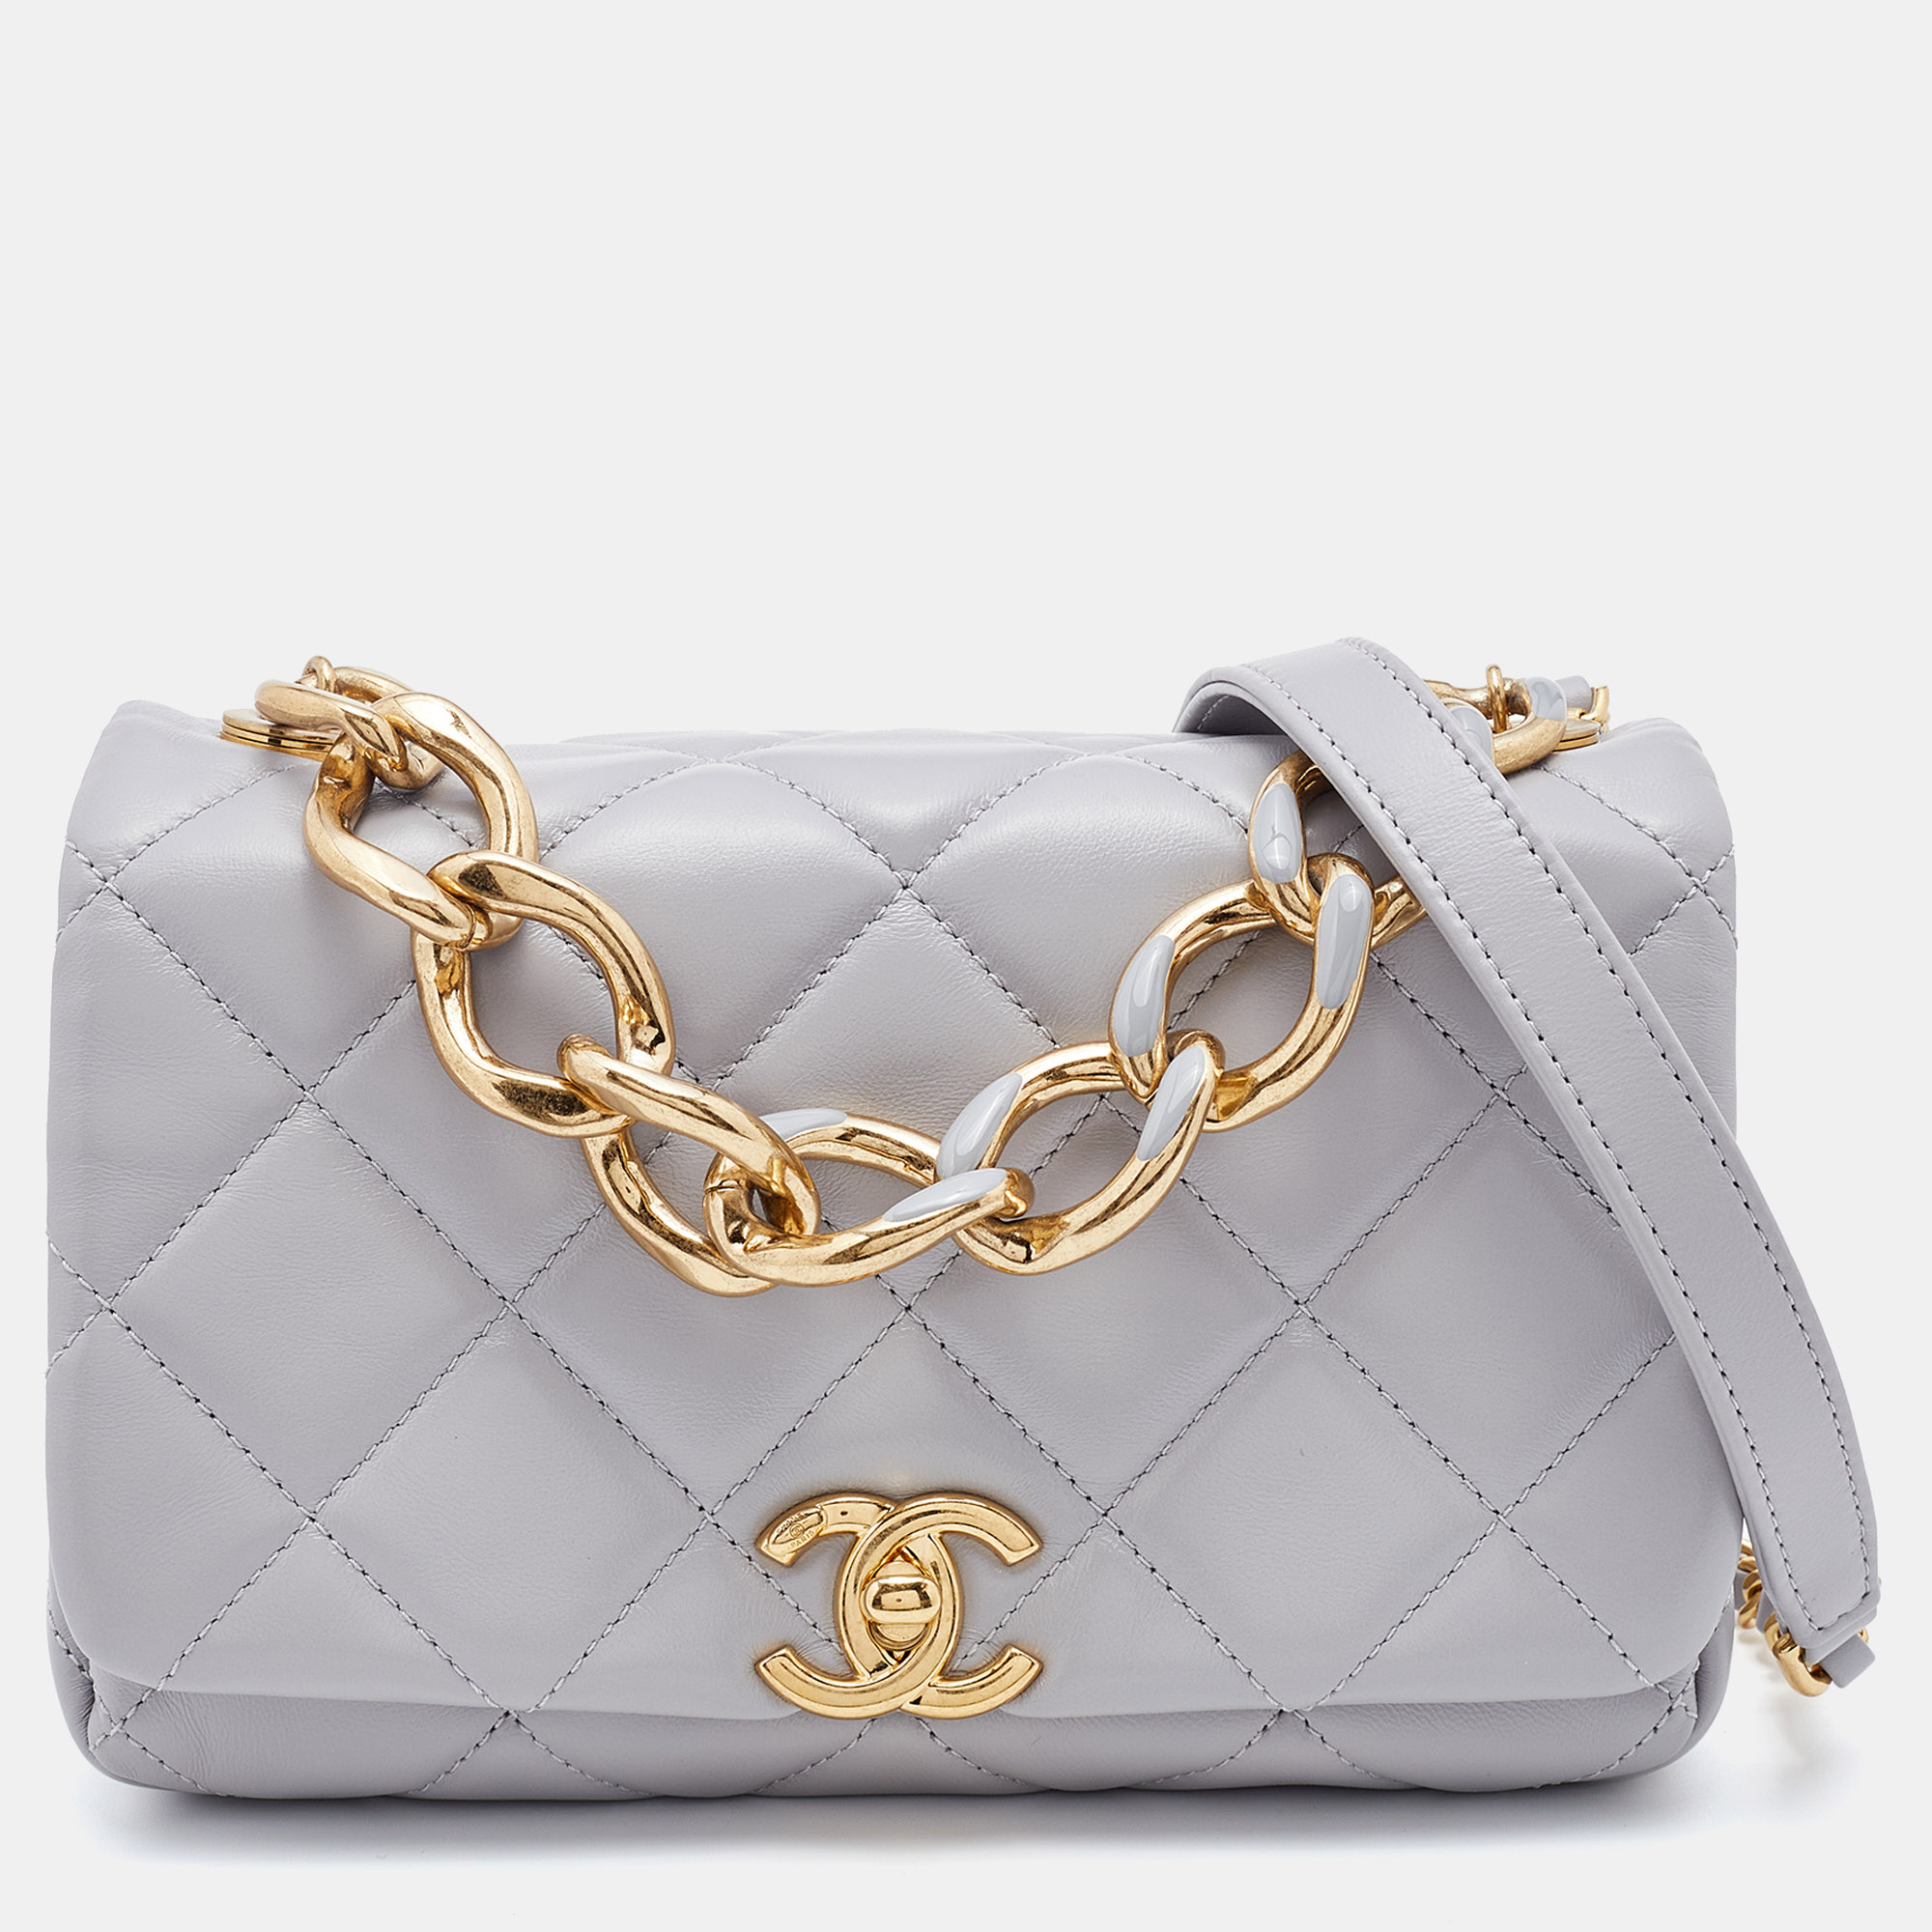 Chanel Grey Quilted Leather Medium Color Match Flap Bag